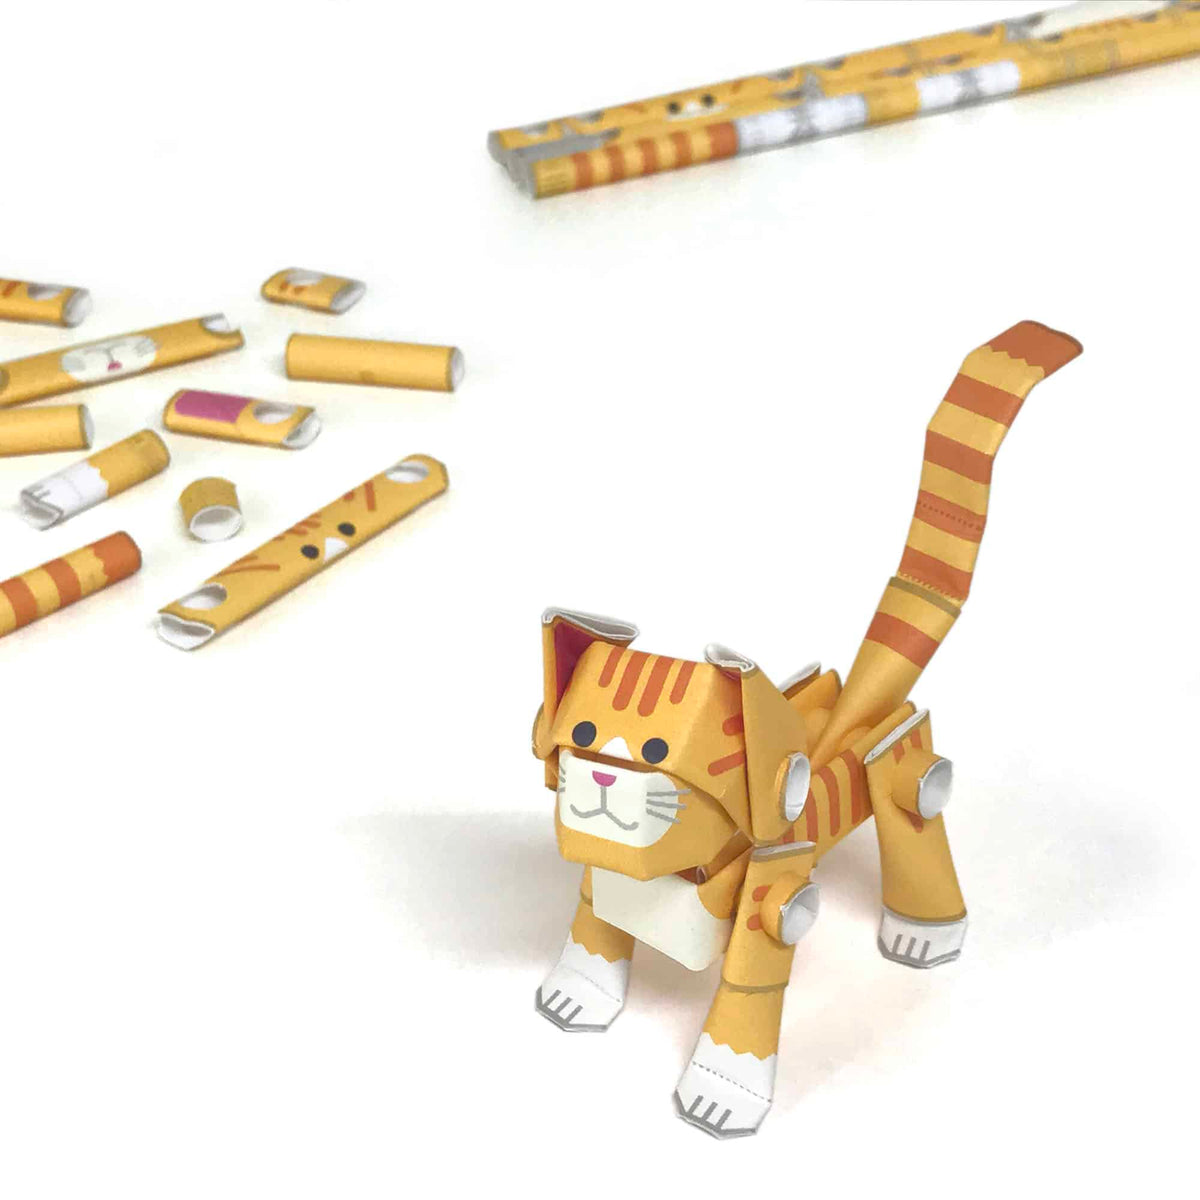 PIPEROID Animal Paper Craft Kits Cover